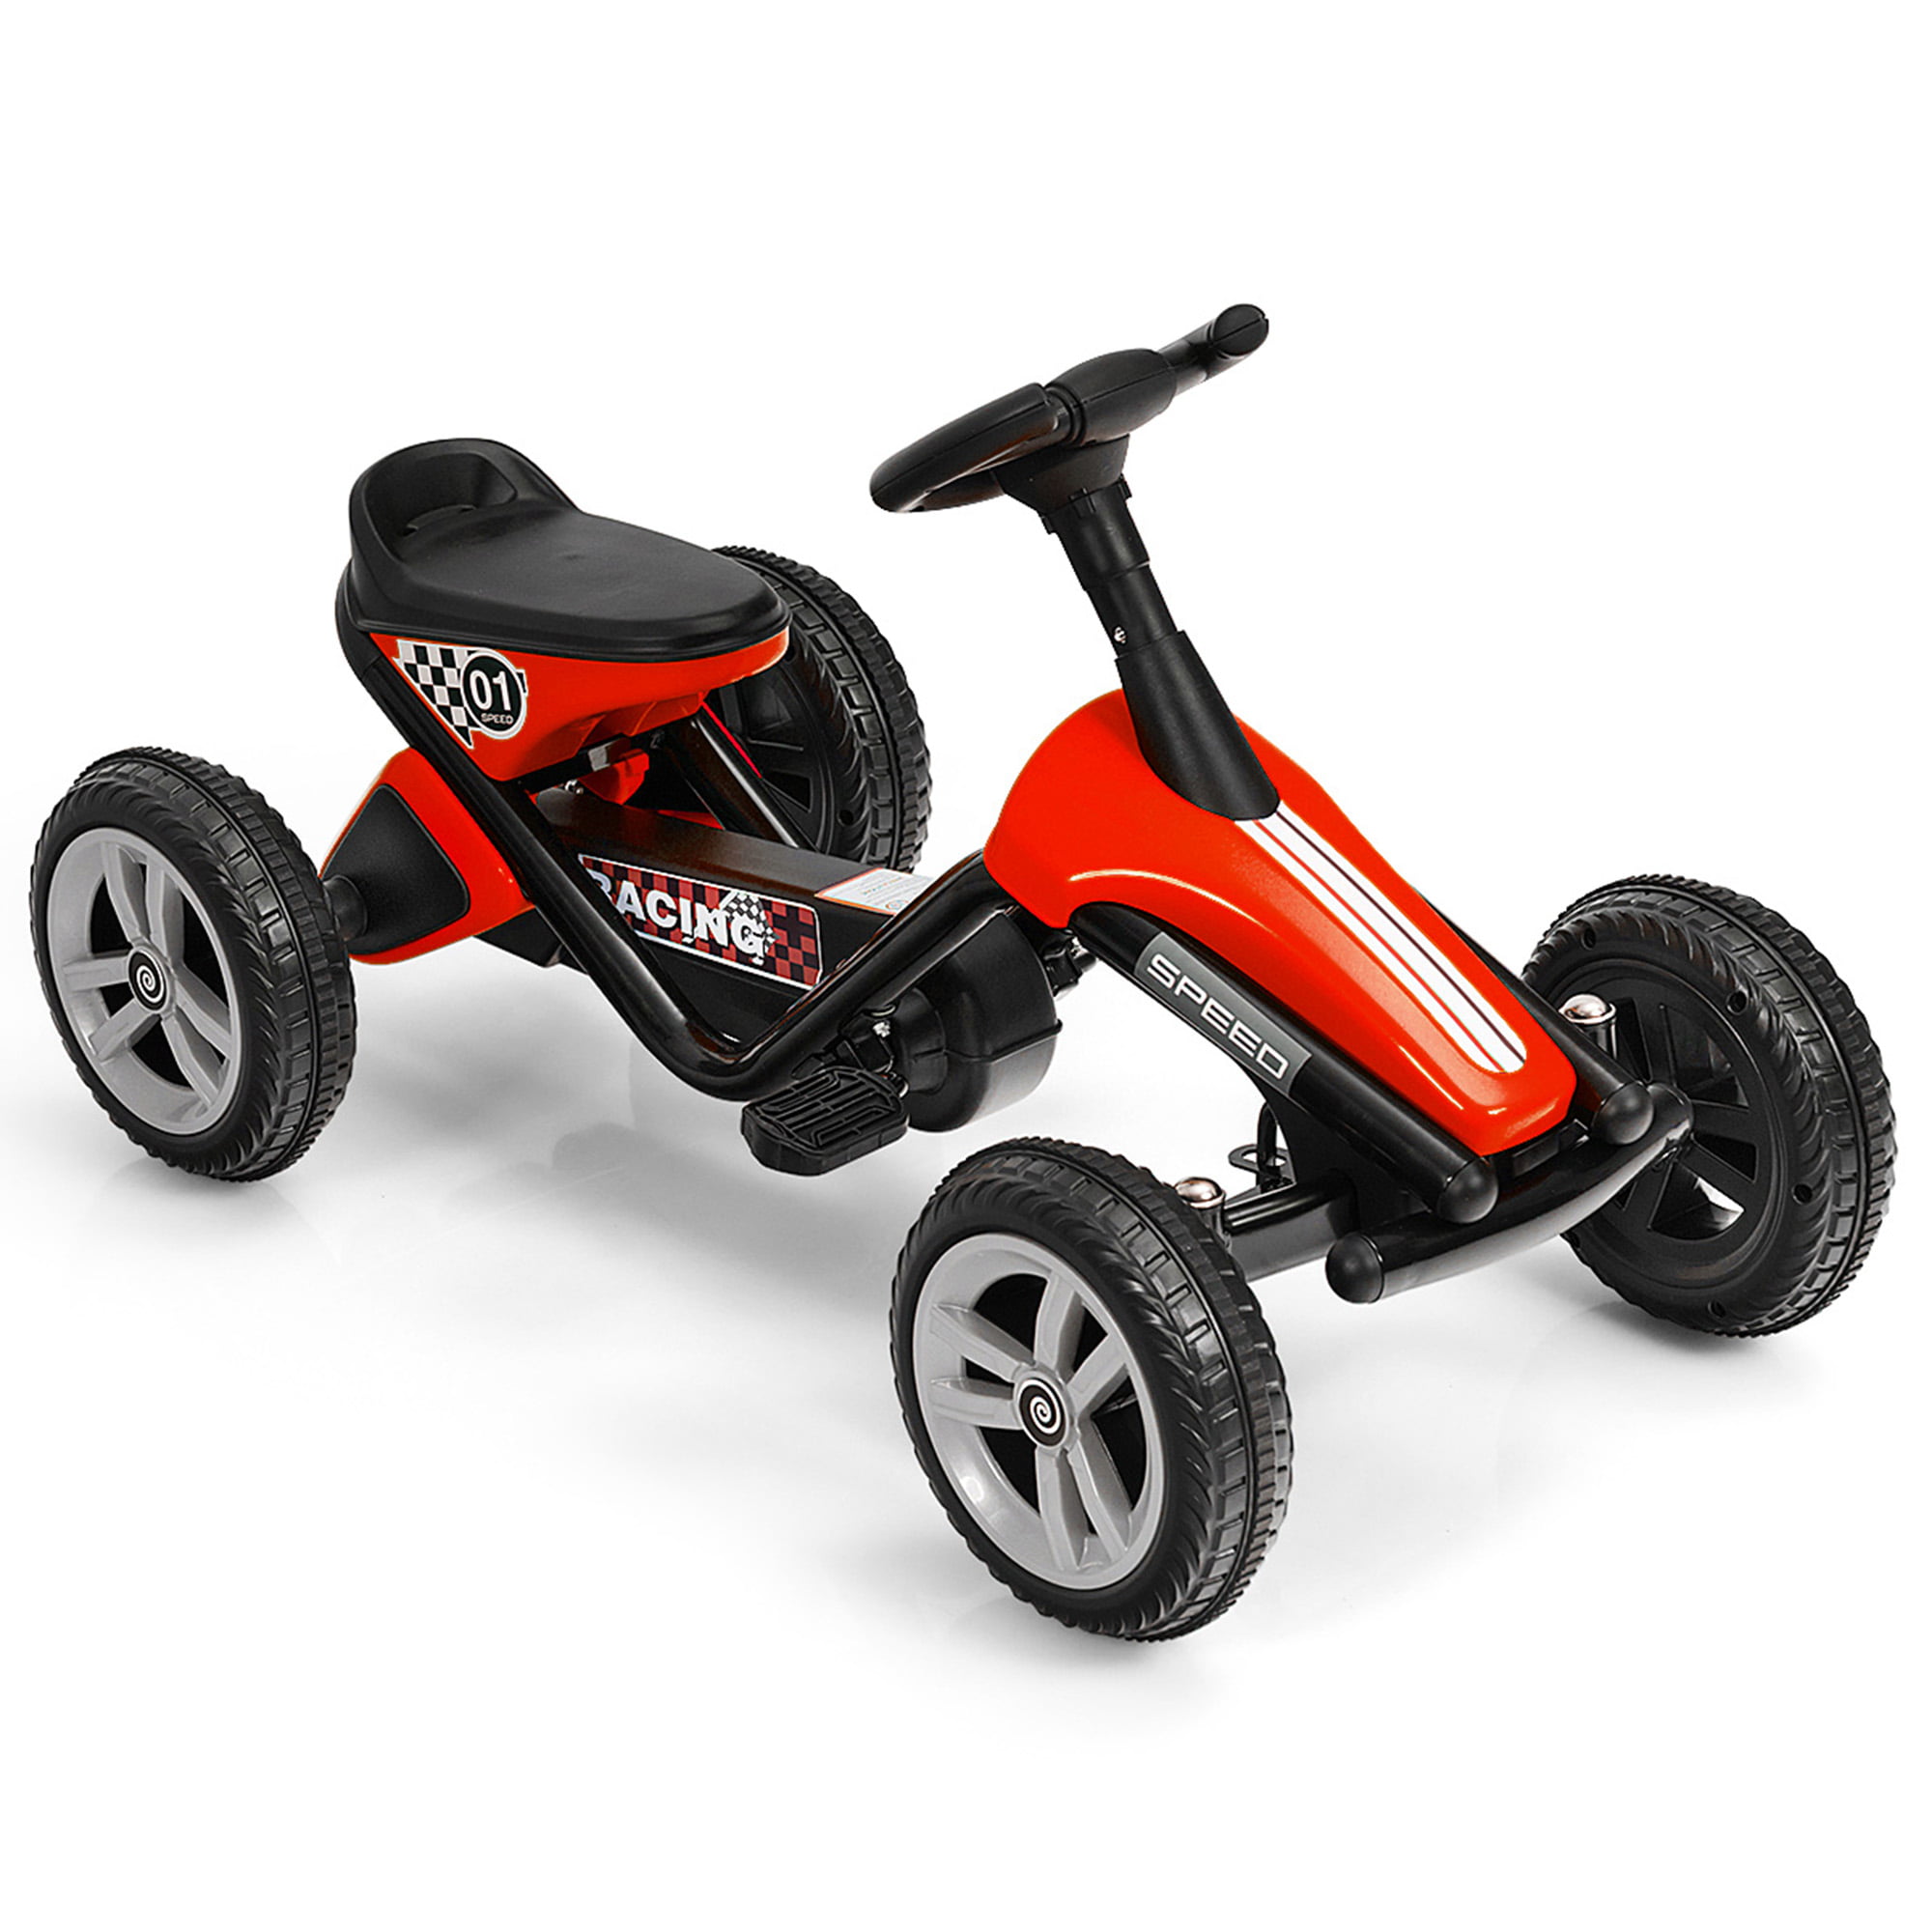 Pedal Car Ride On Toys For Boys & Girls Aged 3-8 Details about   Pedal Go Kart 